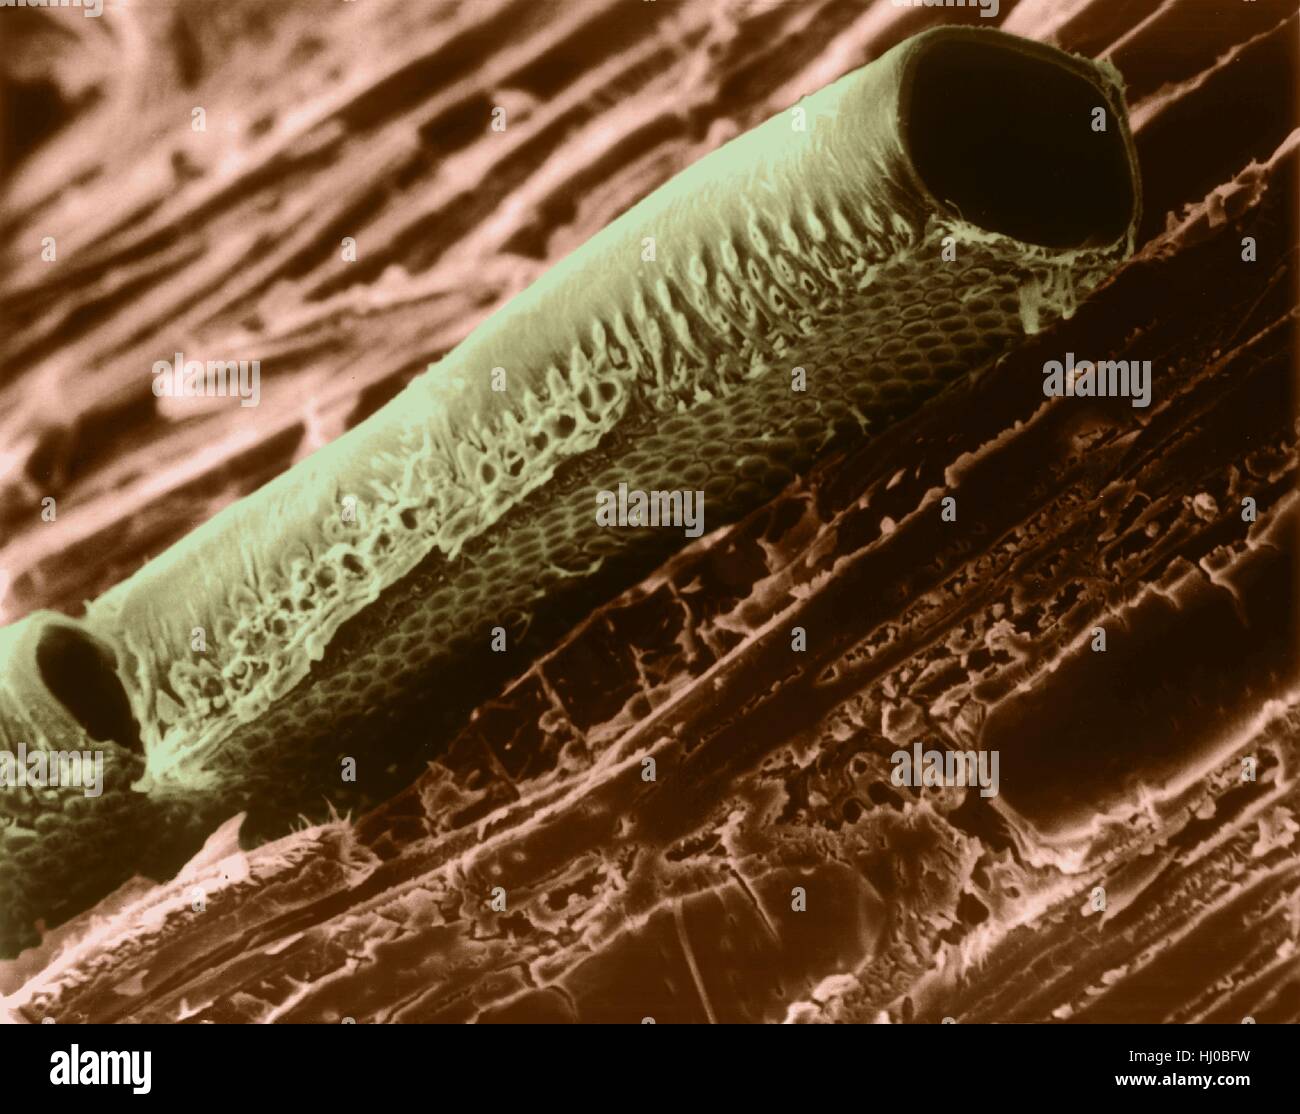 Conductive vessel element in mountain mahogany wood (Cercocarpus sp),coloured scanning electron micrograph (SEM).Note bordered pits in cellulose wall.A conductive vessel element is elongated,water-conducting cell in xylem,one of two kinds of tracheary elements.The cells die when mature,leaving only Stock Photo